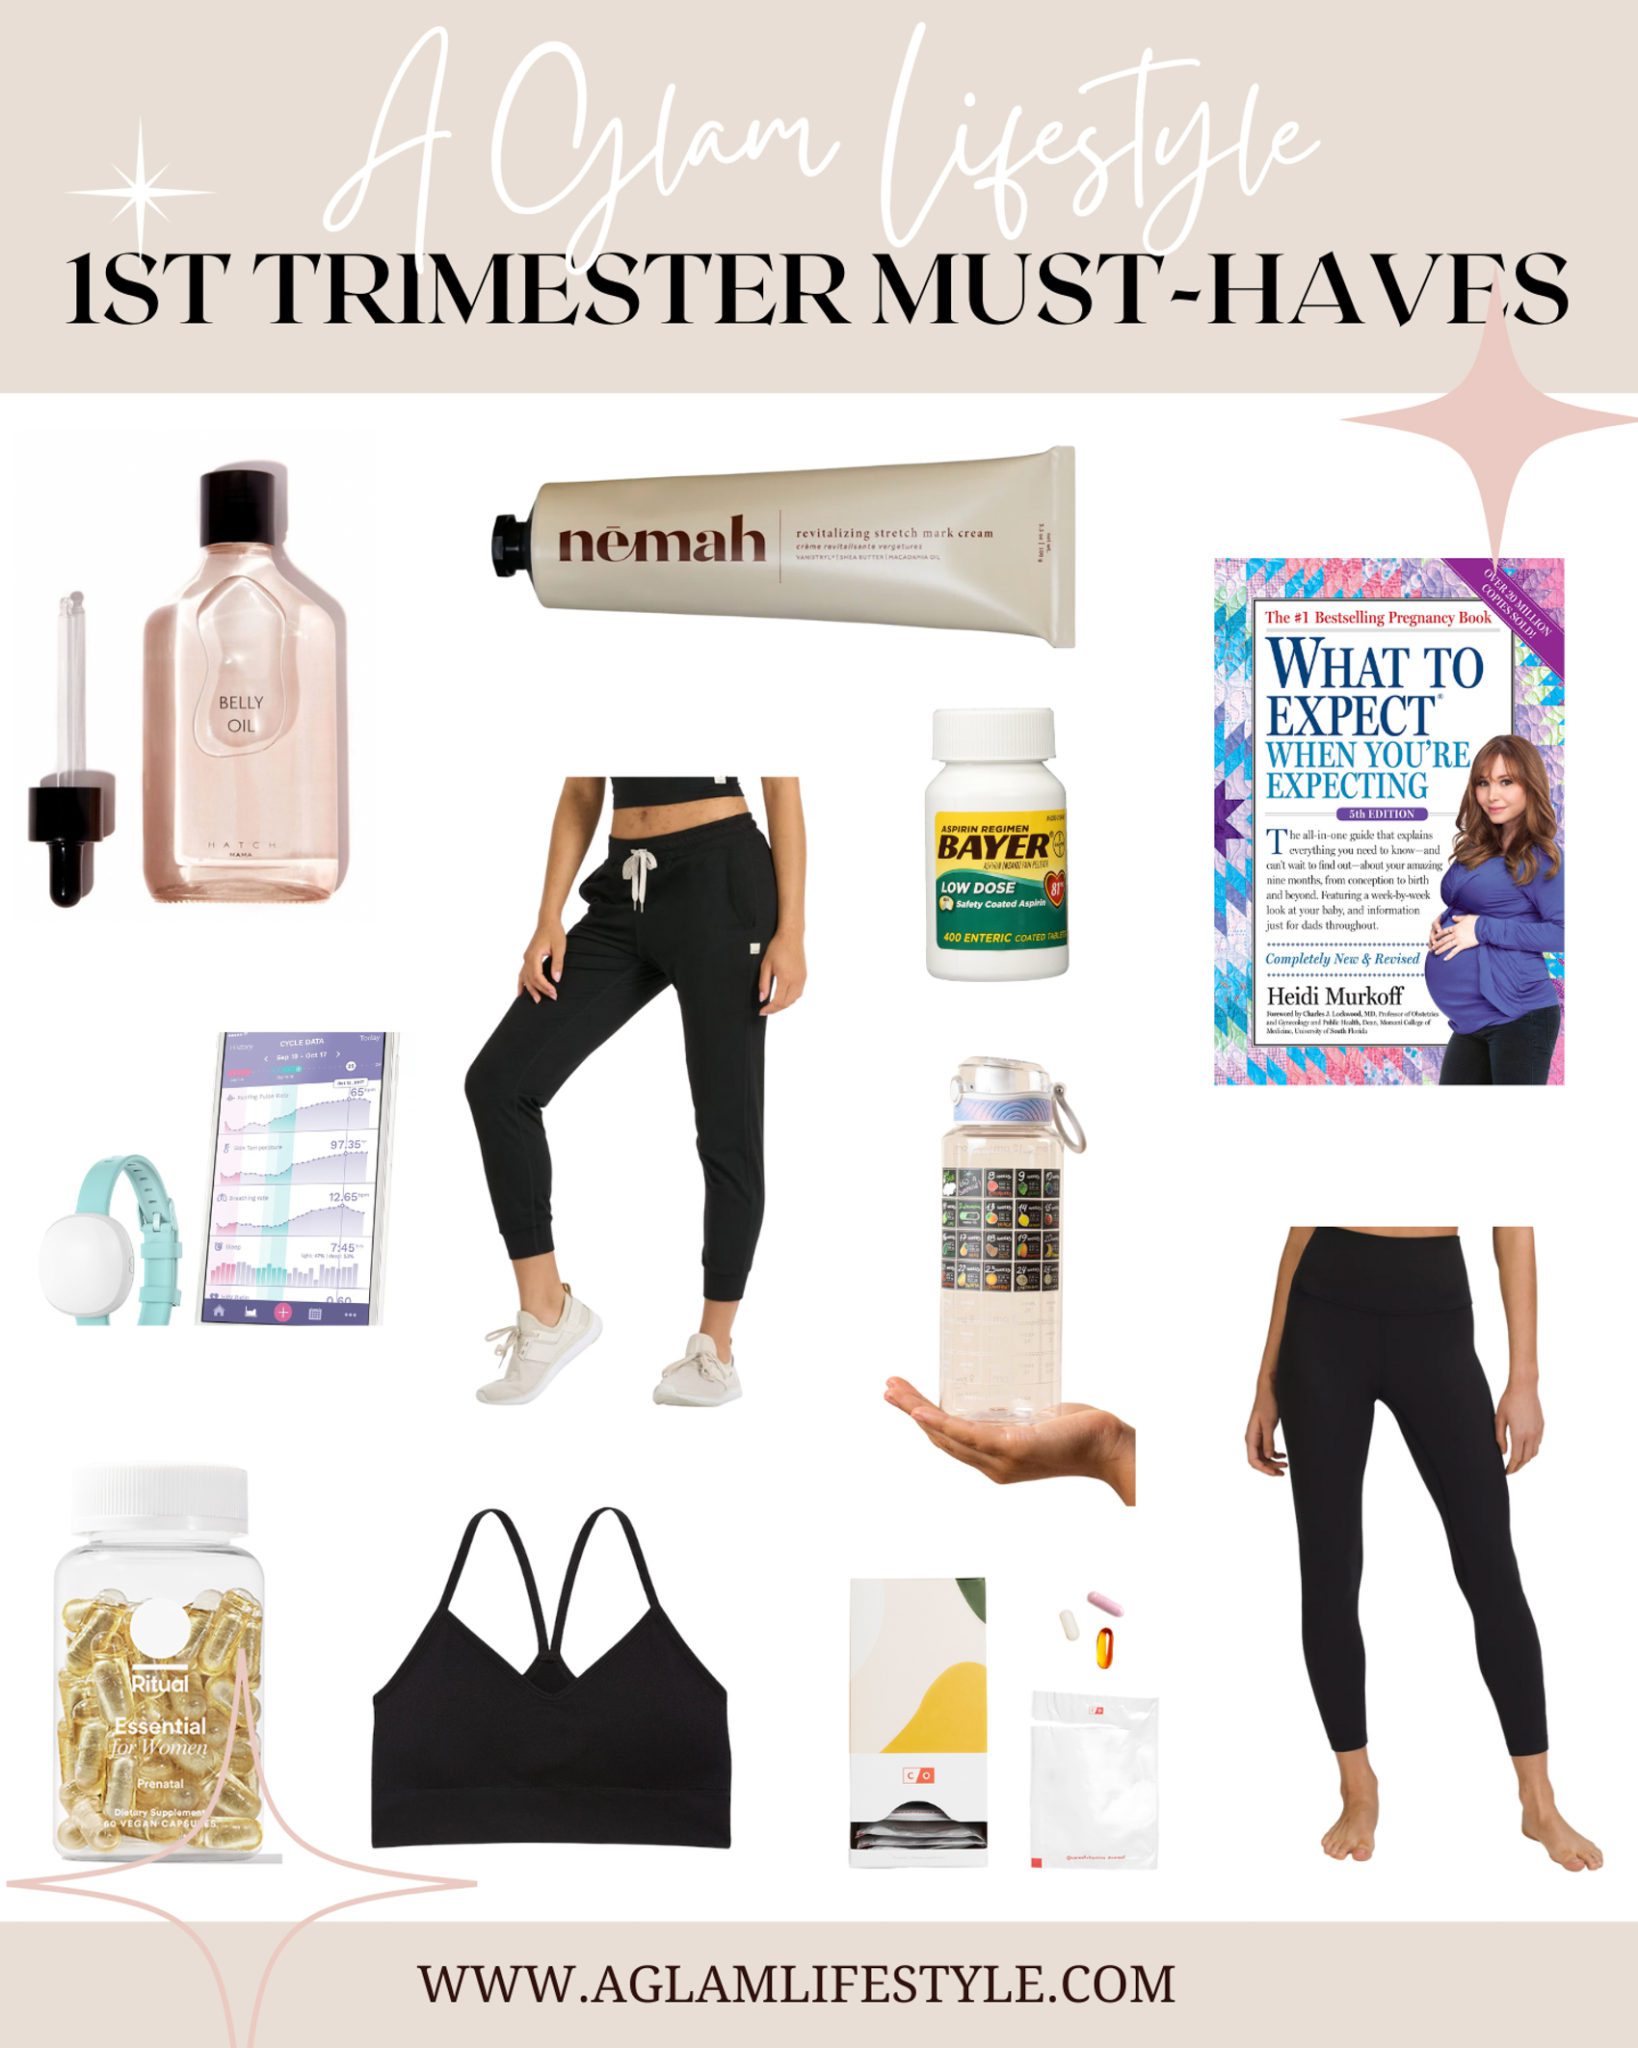 14 First Trimester Must-Haves for Your Pregnancy - Baby Chick